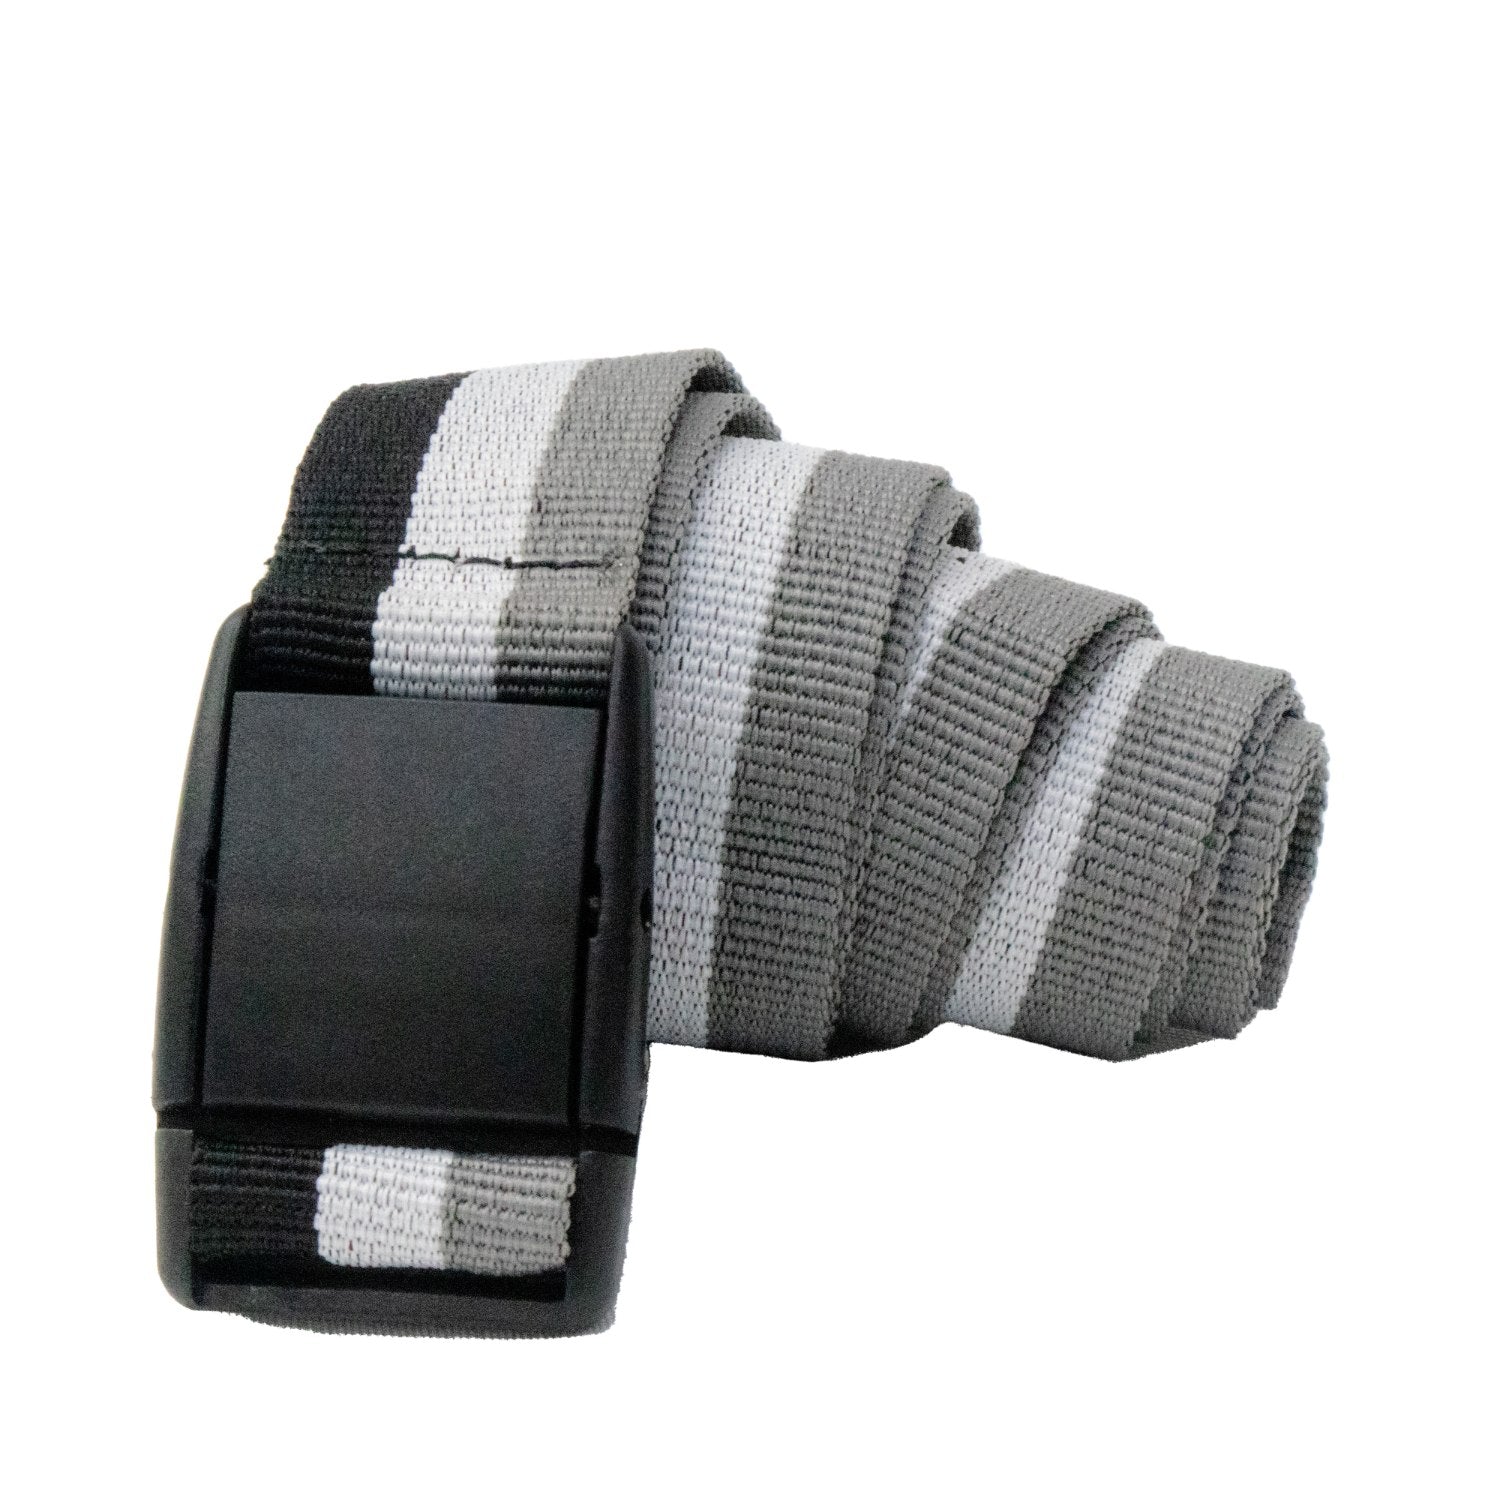 Buy Gokyo Belt for Hiking Trousers | Belt at Gokyo Outdoor Clothing & Gear